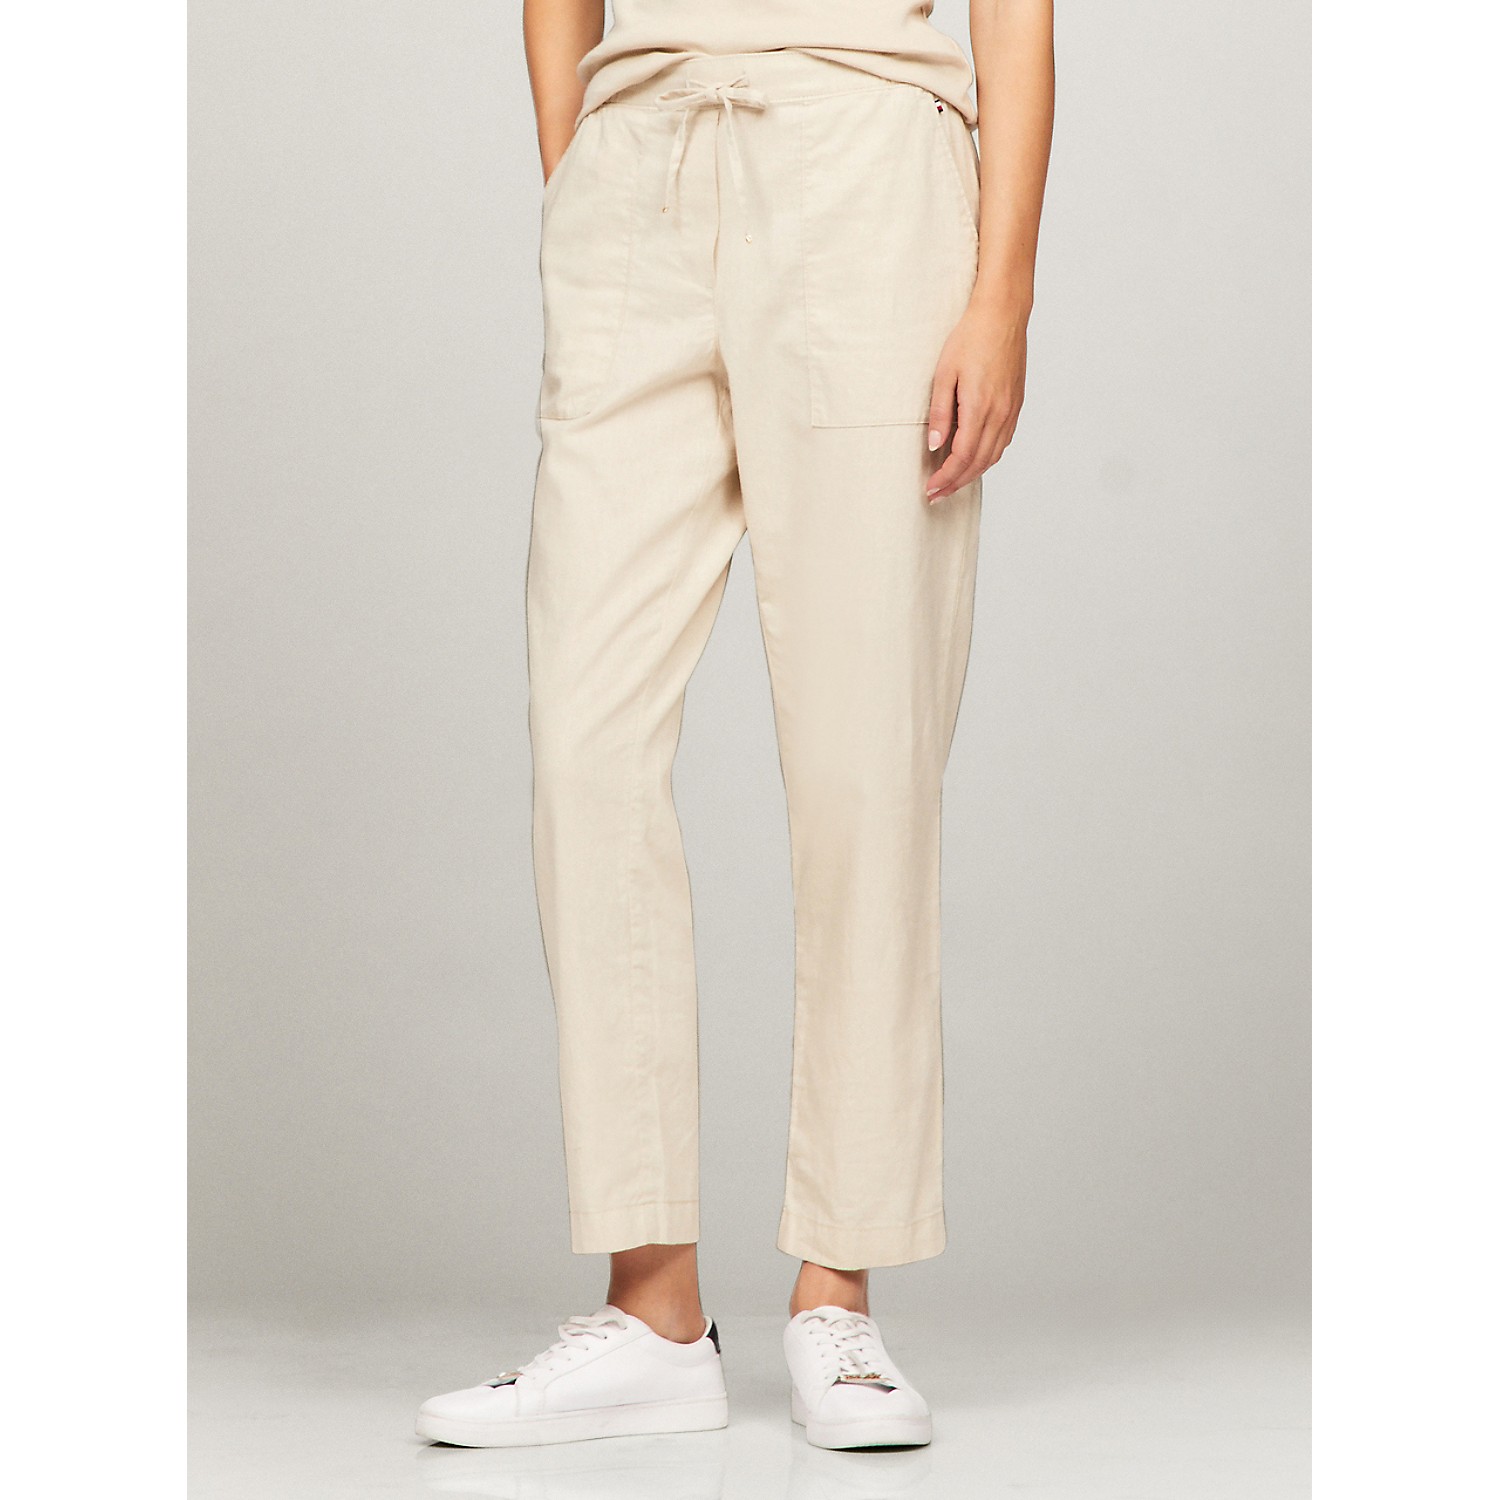 TOMMY HILFIGER Boy-Fit Cotton and Linen Pull-On Pant